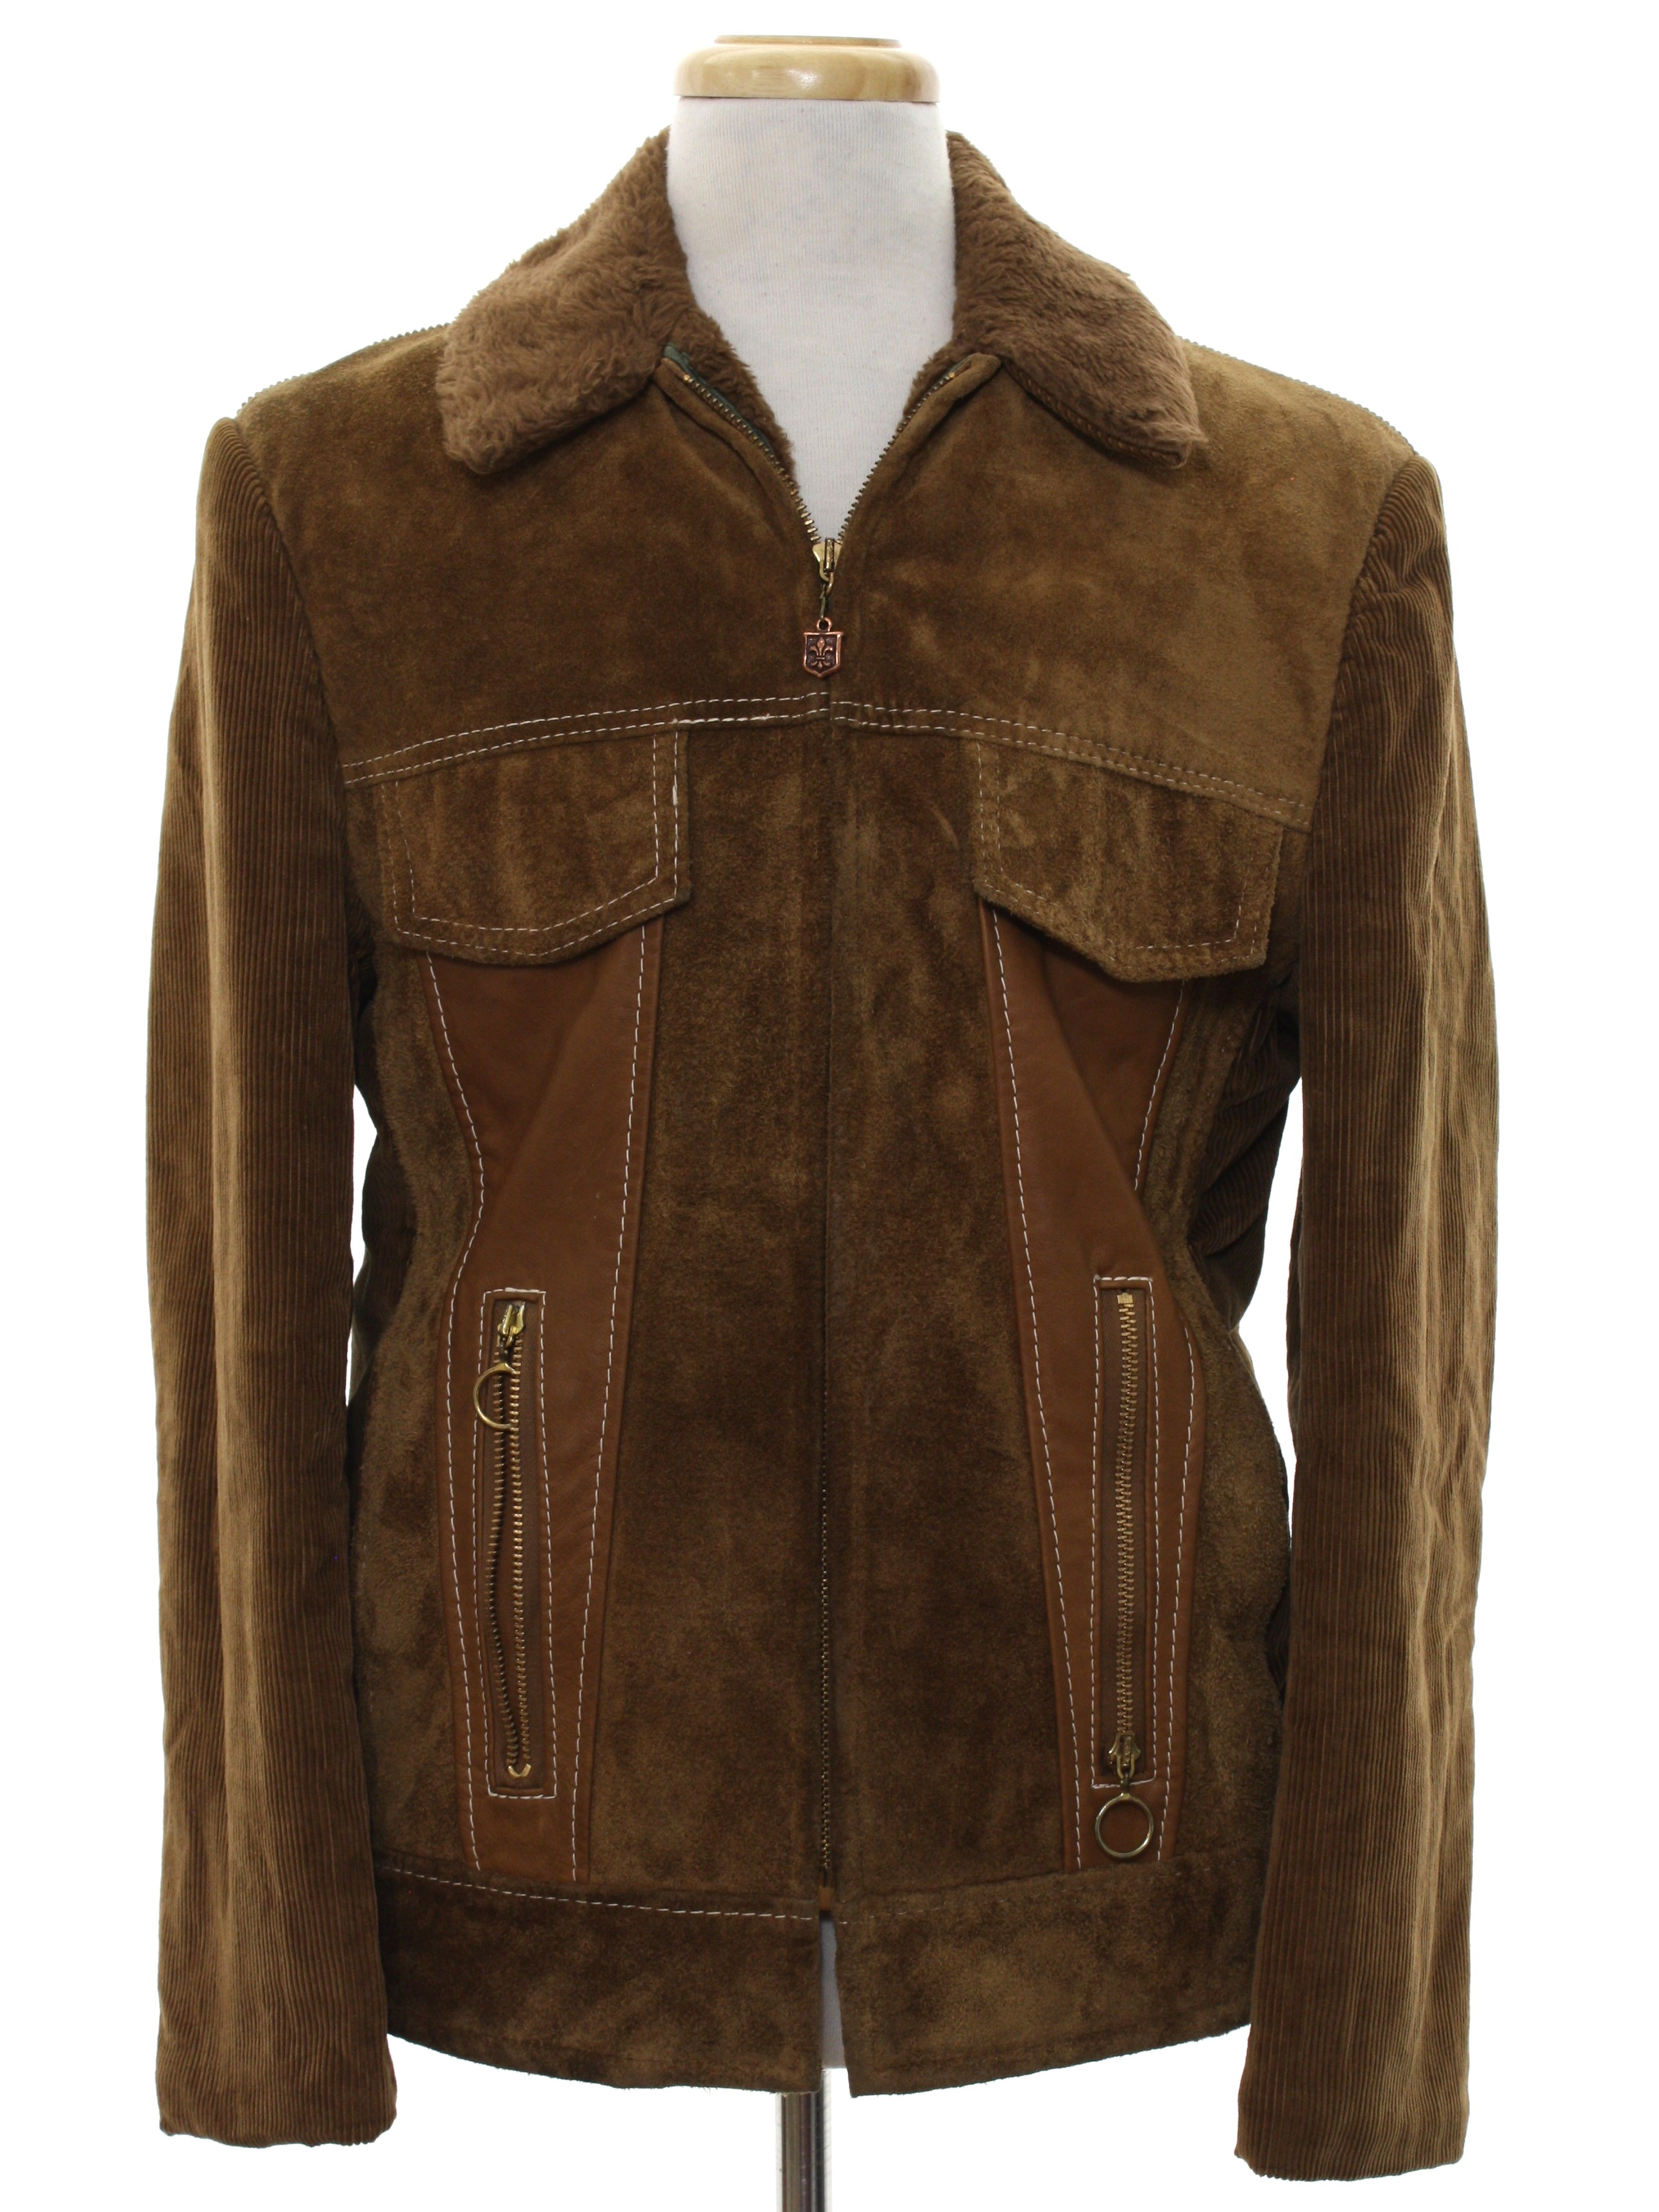 Vintage Sears Leather Shop 1970s Leather Jacket: 70s -Sears Leather ...